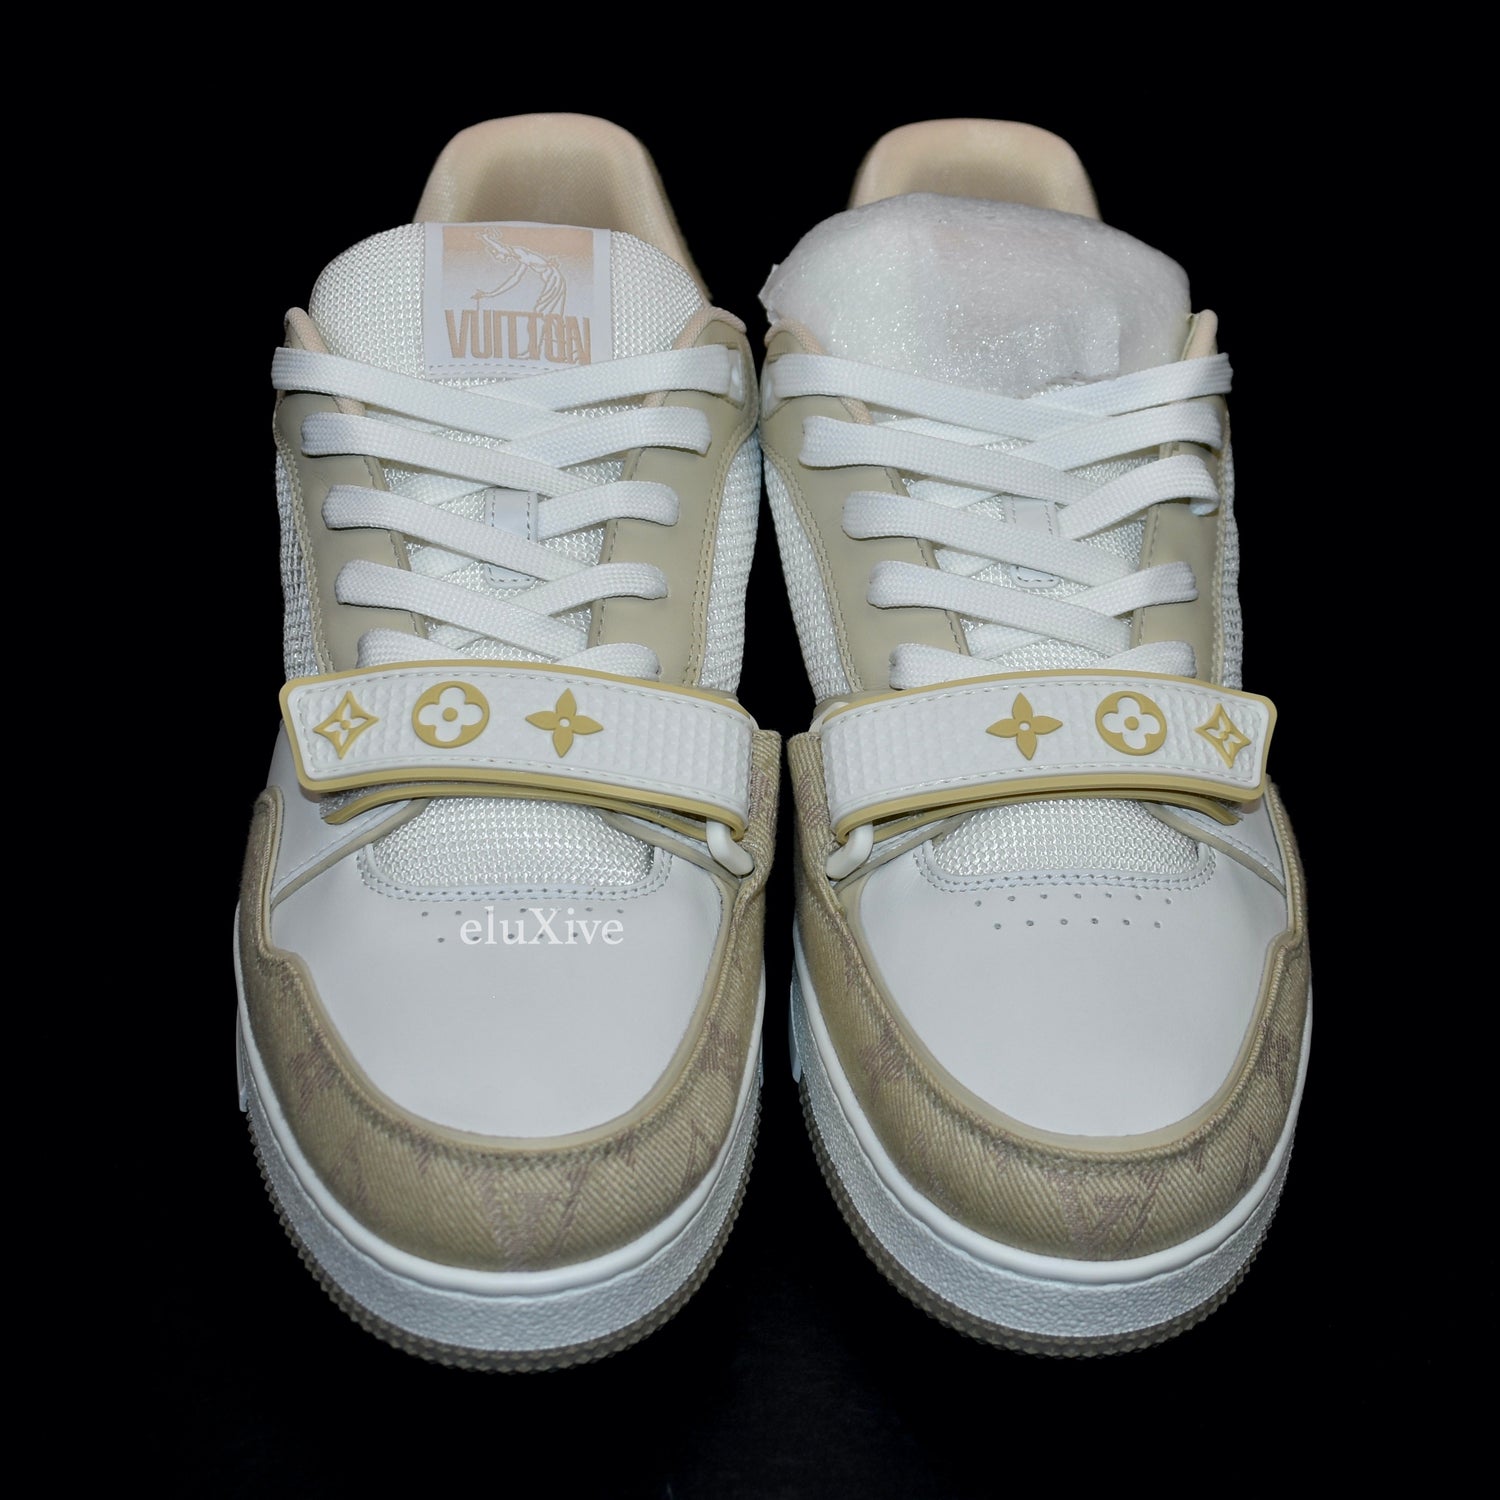 Louis Vuitton White & Beige Strap LV Trainer Sneakers worn by